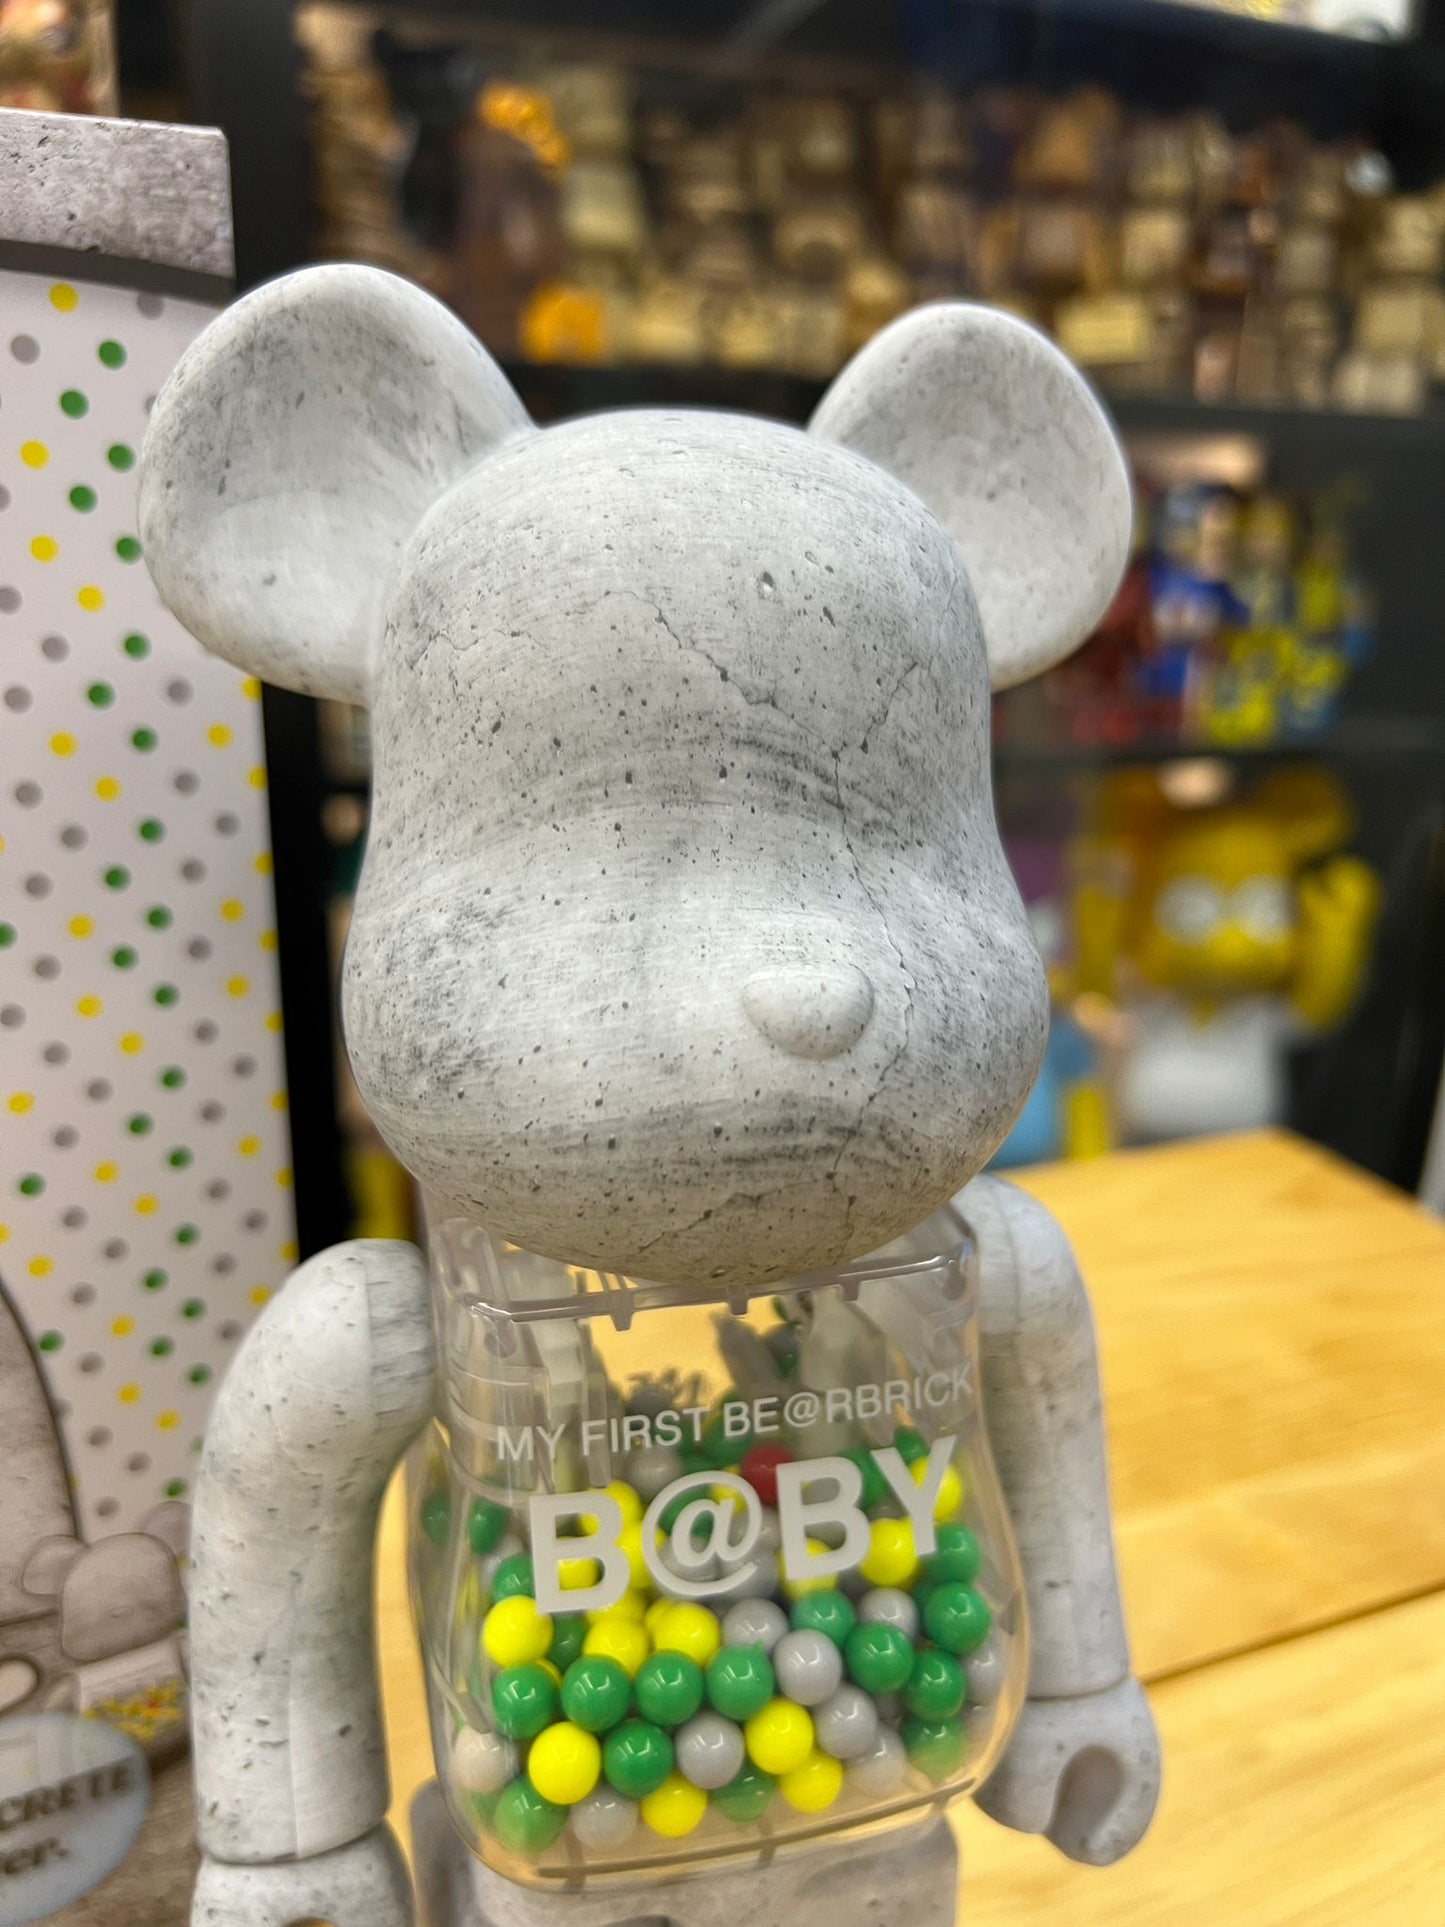 100% & 400% Be@rbrick My First Baby “Concrete”